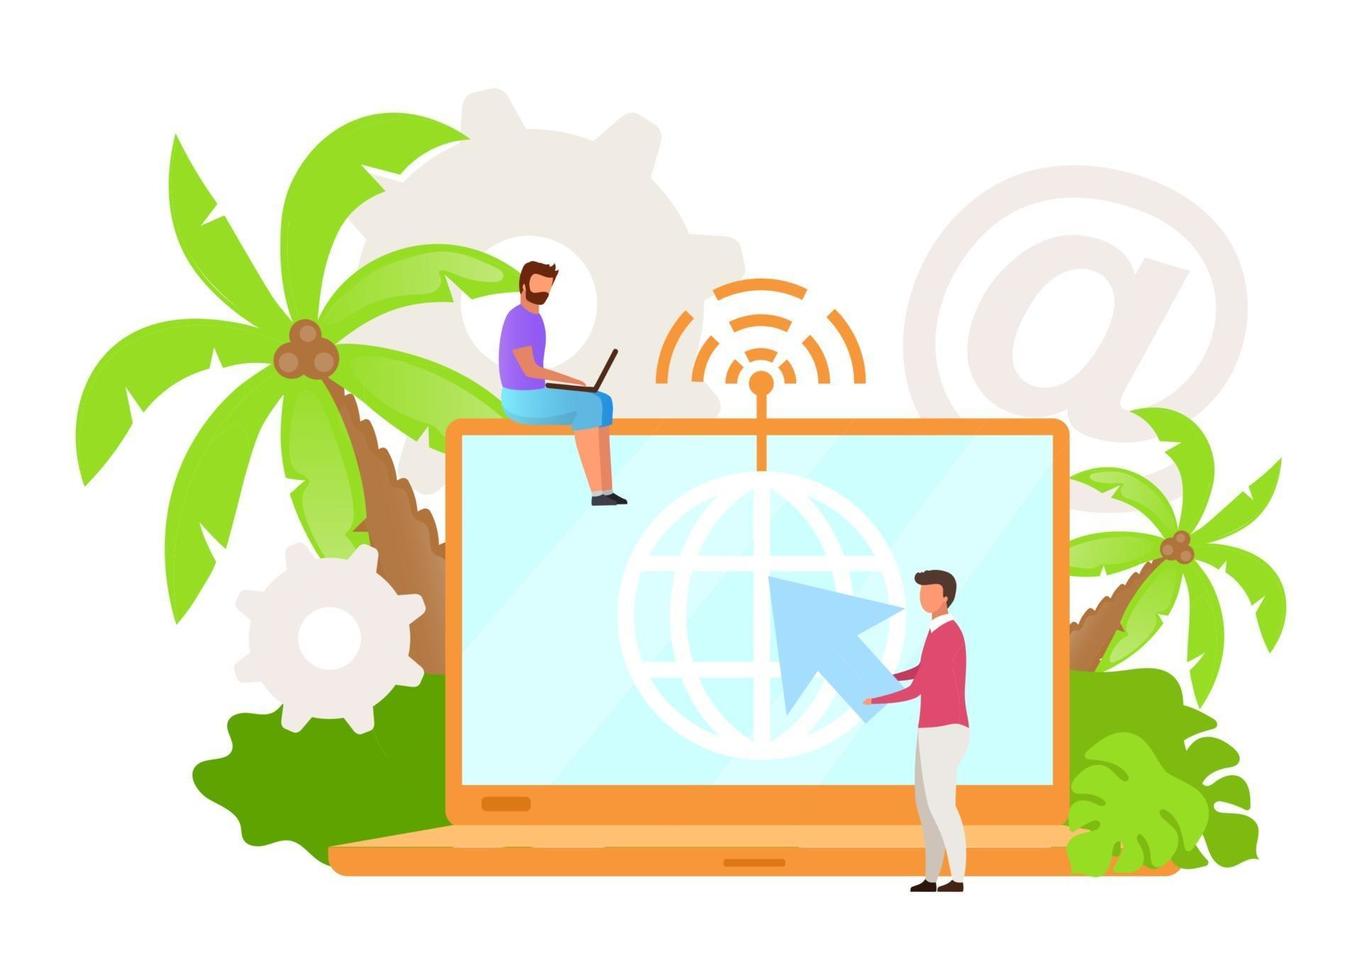 Internet provider flat vector illustration. Virtual office. Remote work. Flexible workspace. Wireless connection. Wi-Fi. Indonesian business. Isolated cartoon character on white background